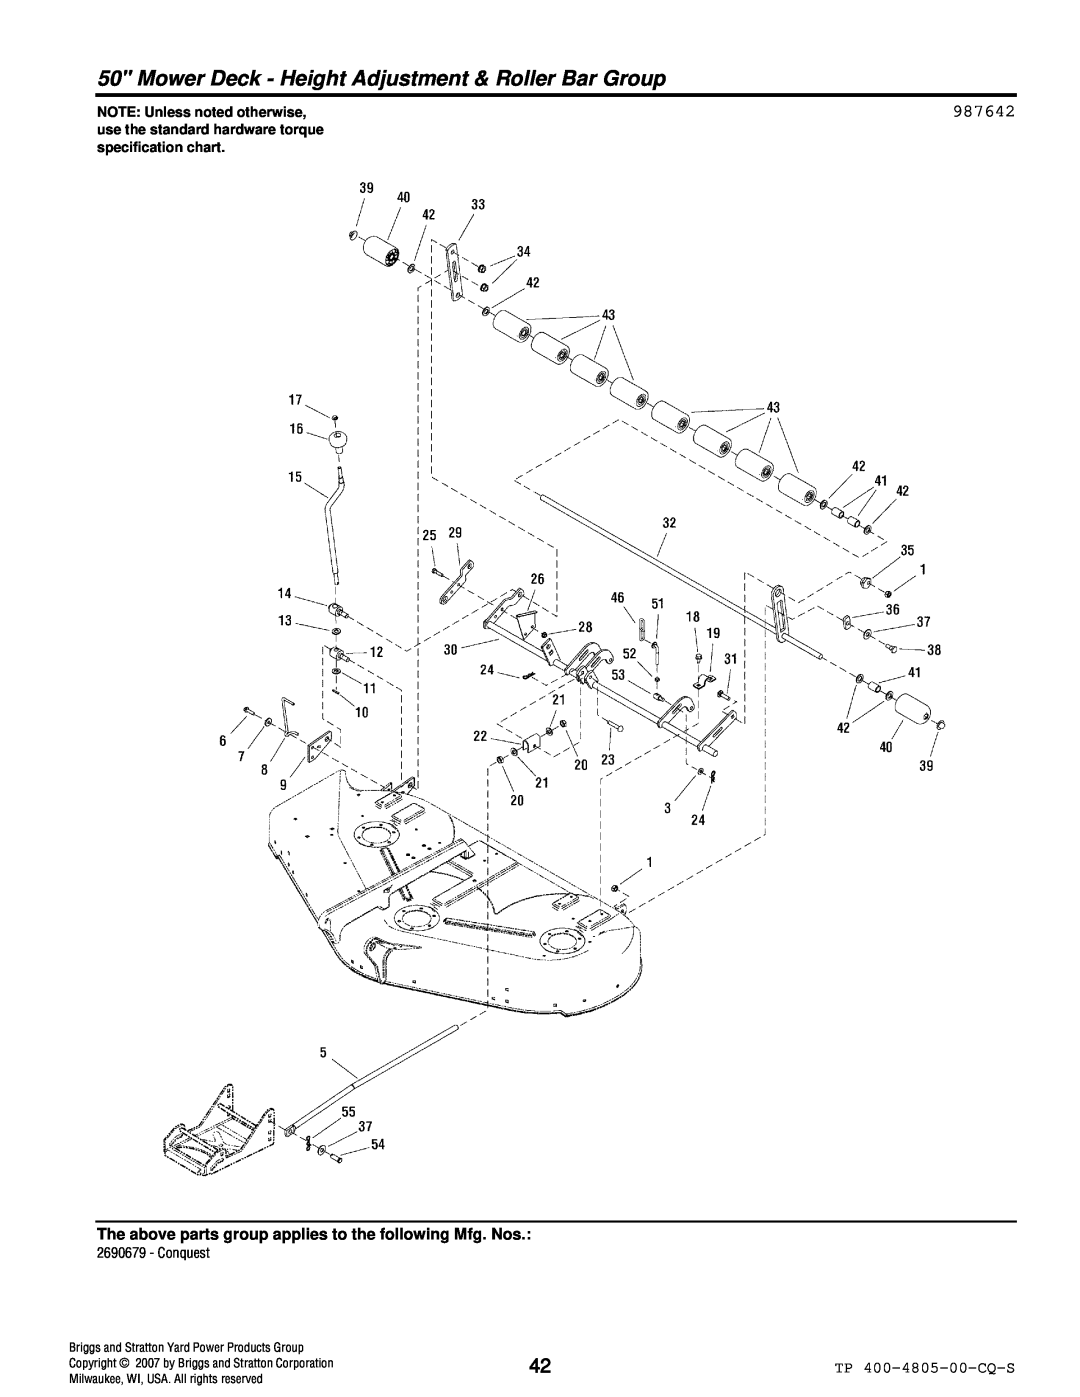 Simplicity 4WD Series manual 987642, NOTE Unless noted otherwise, Briggs and Stratton Yard Power Products Group 